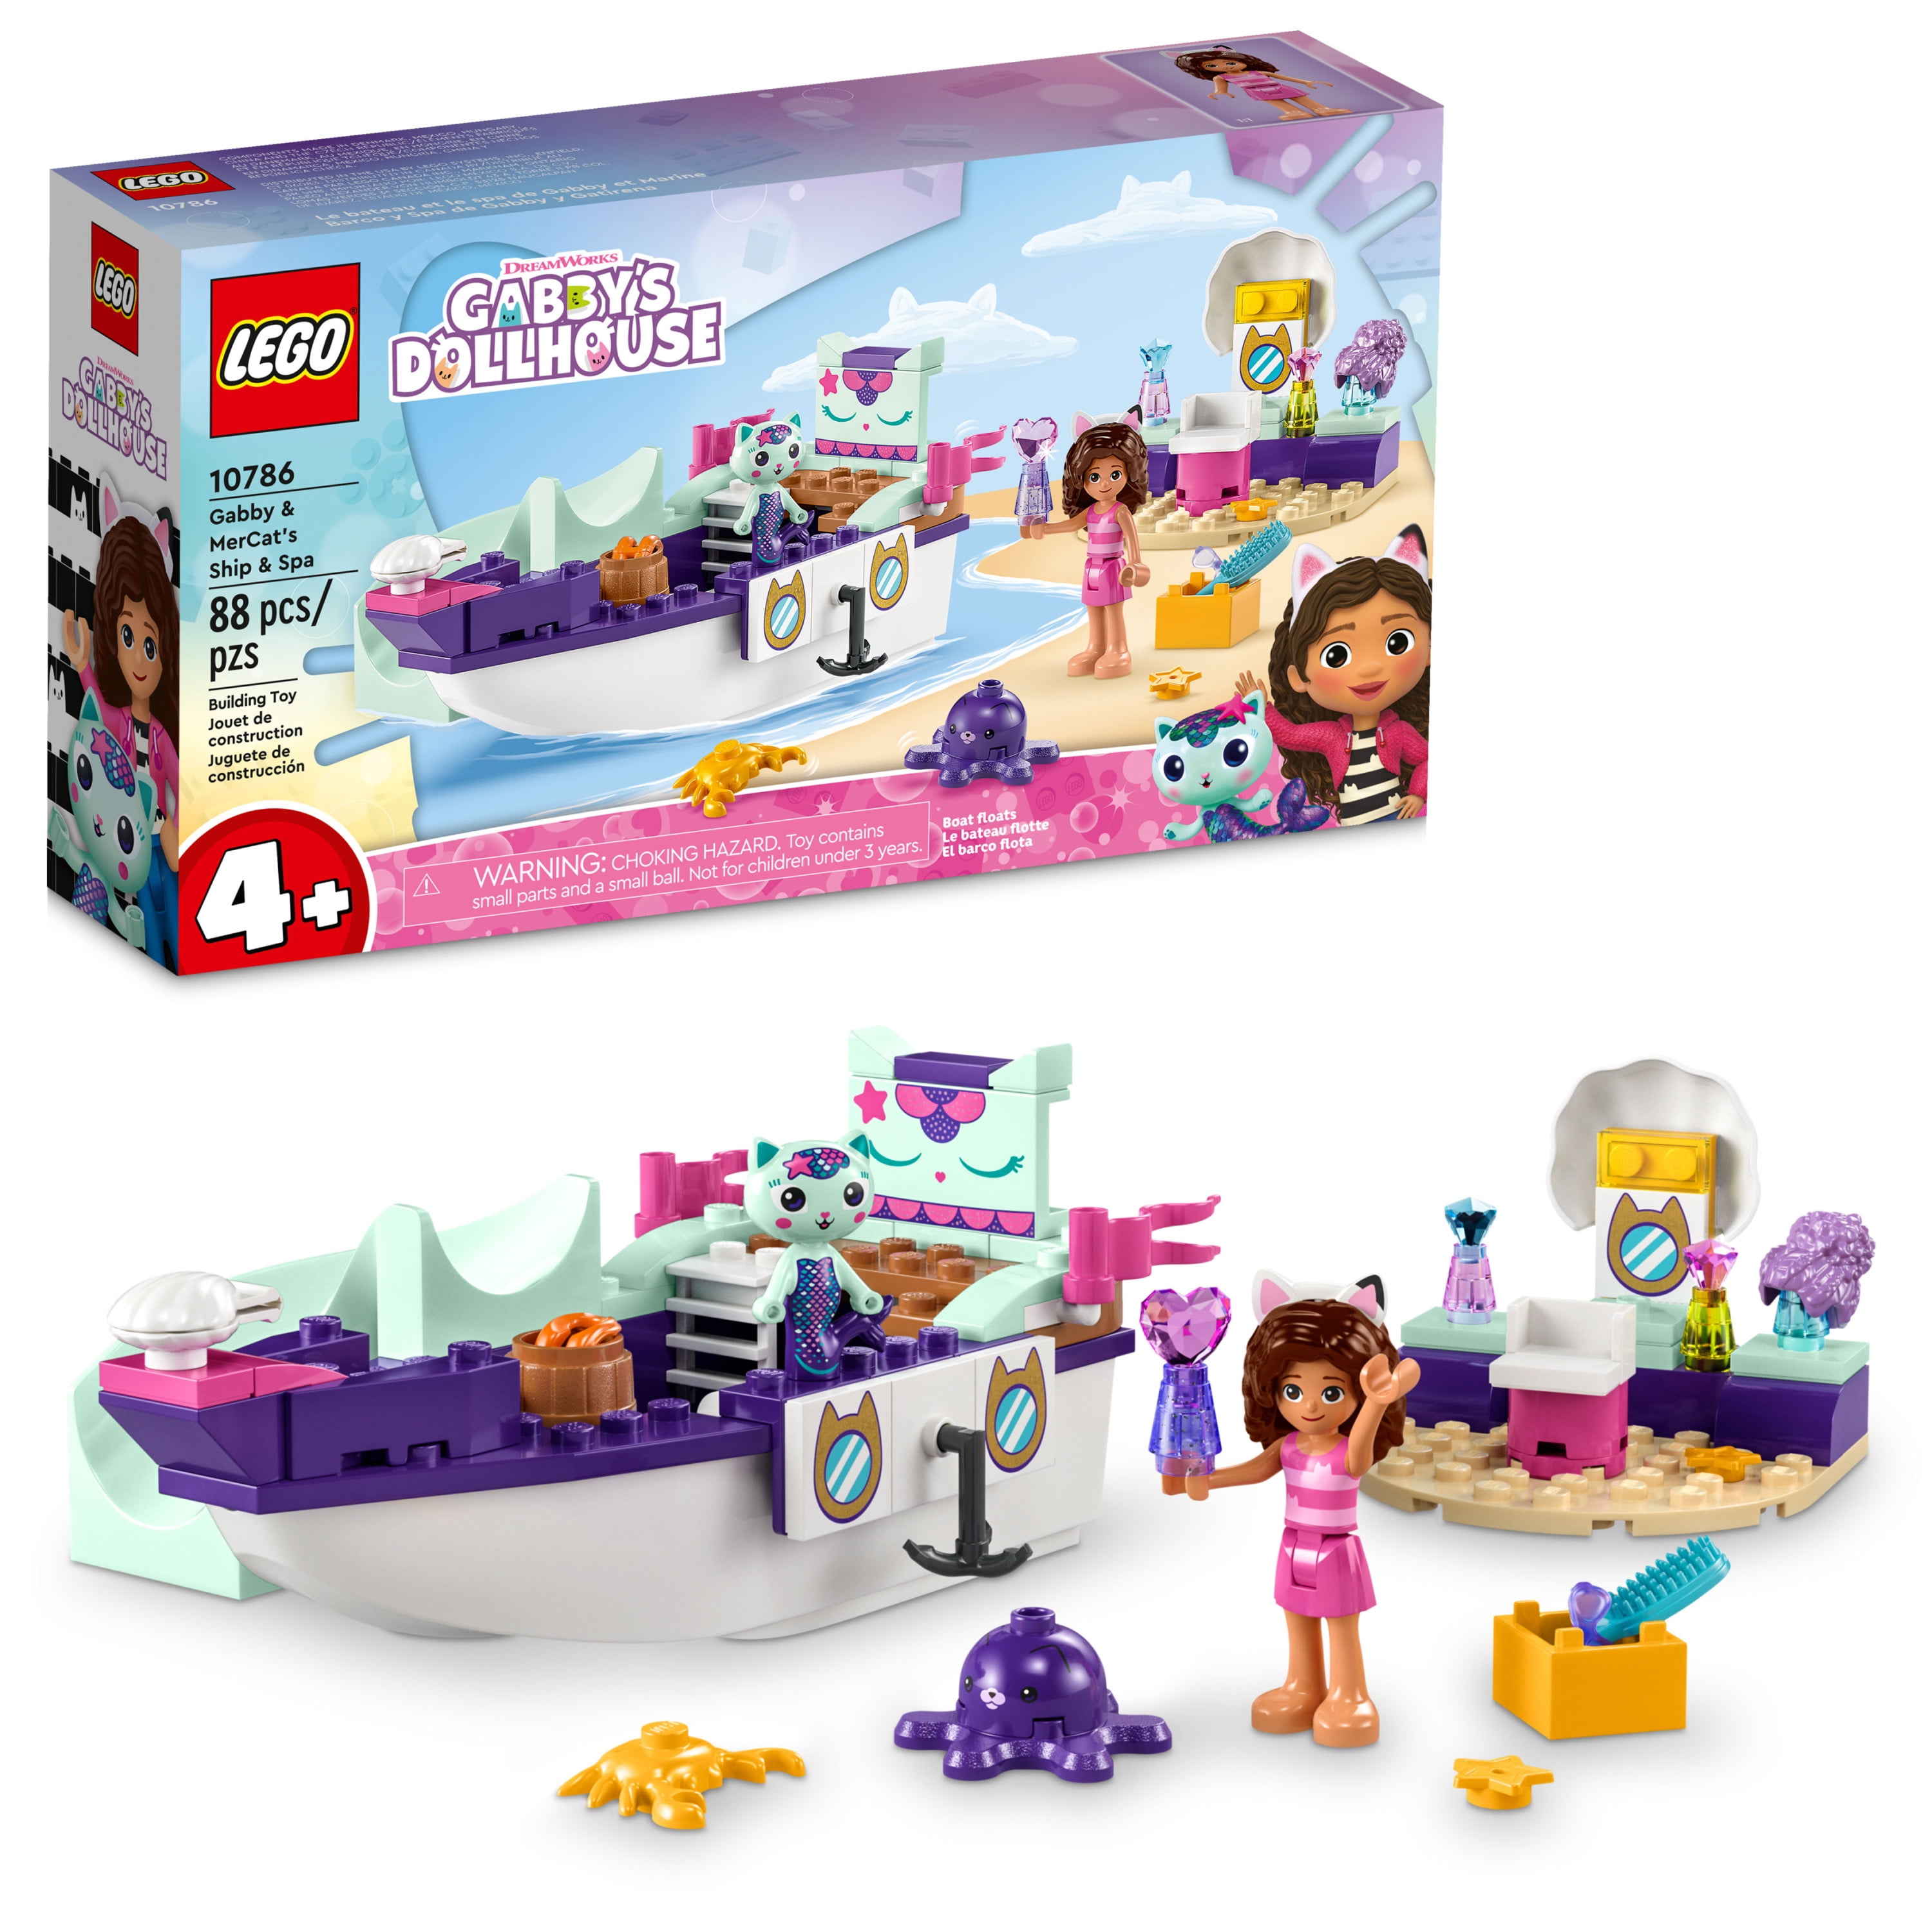 LEGO Gabby's Dollhouse & MerCat's Ship & Spa 10786 Building Toy for of the DreamWorks Animation Series, Boat Beauty Salon and Accessories for Imaginative Play for Kids Ages 4+ -